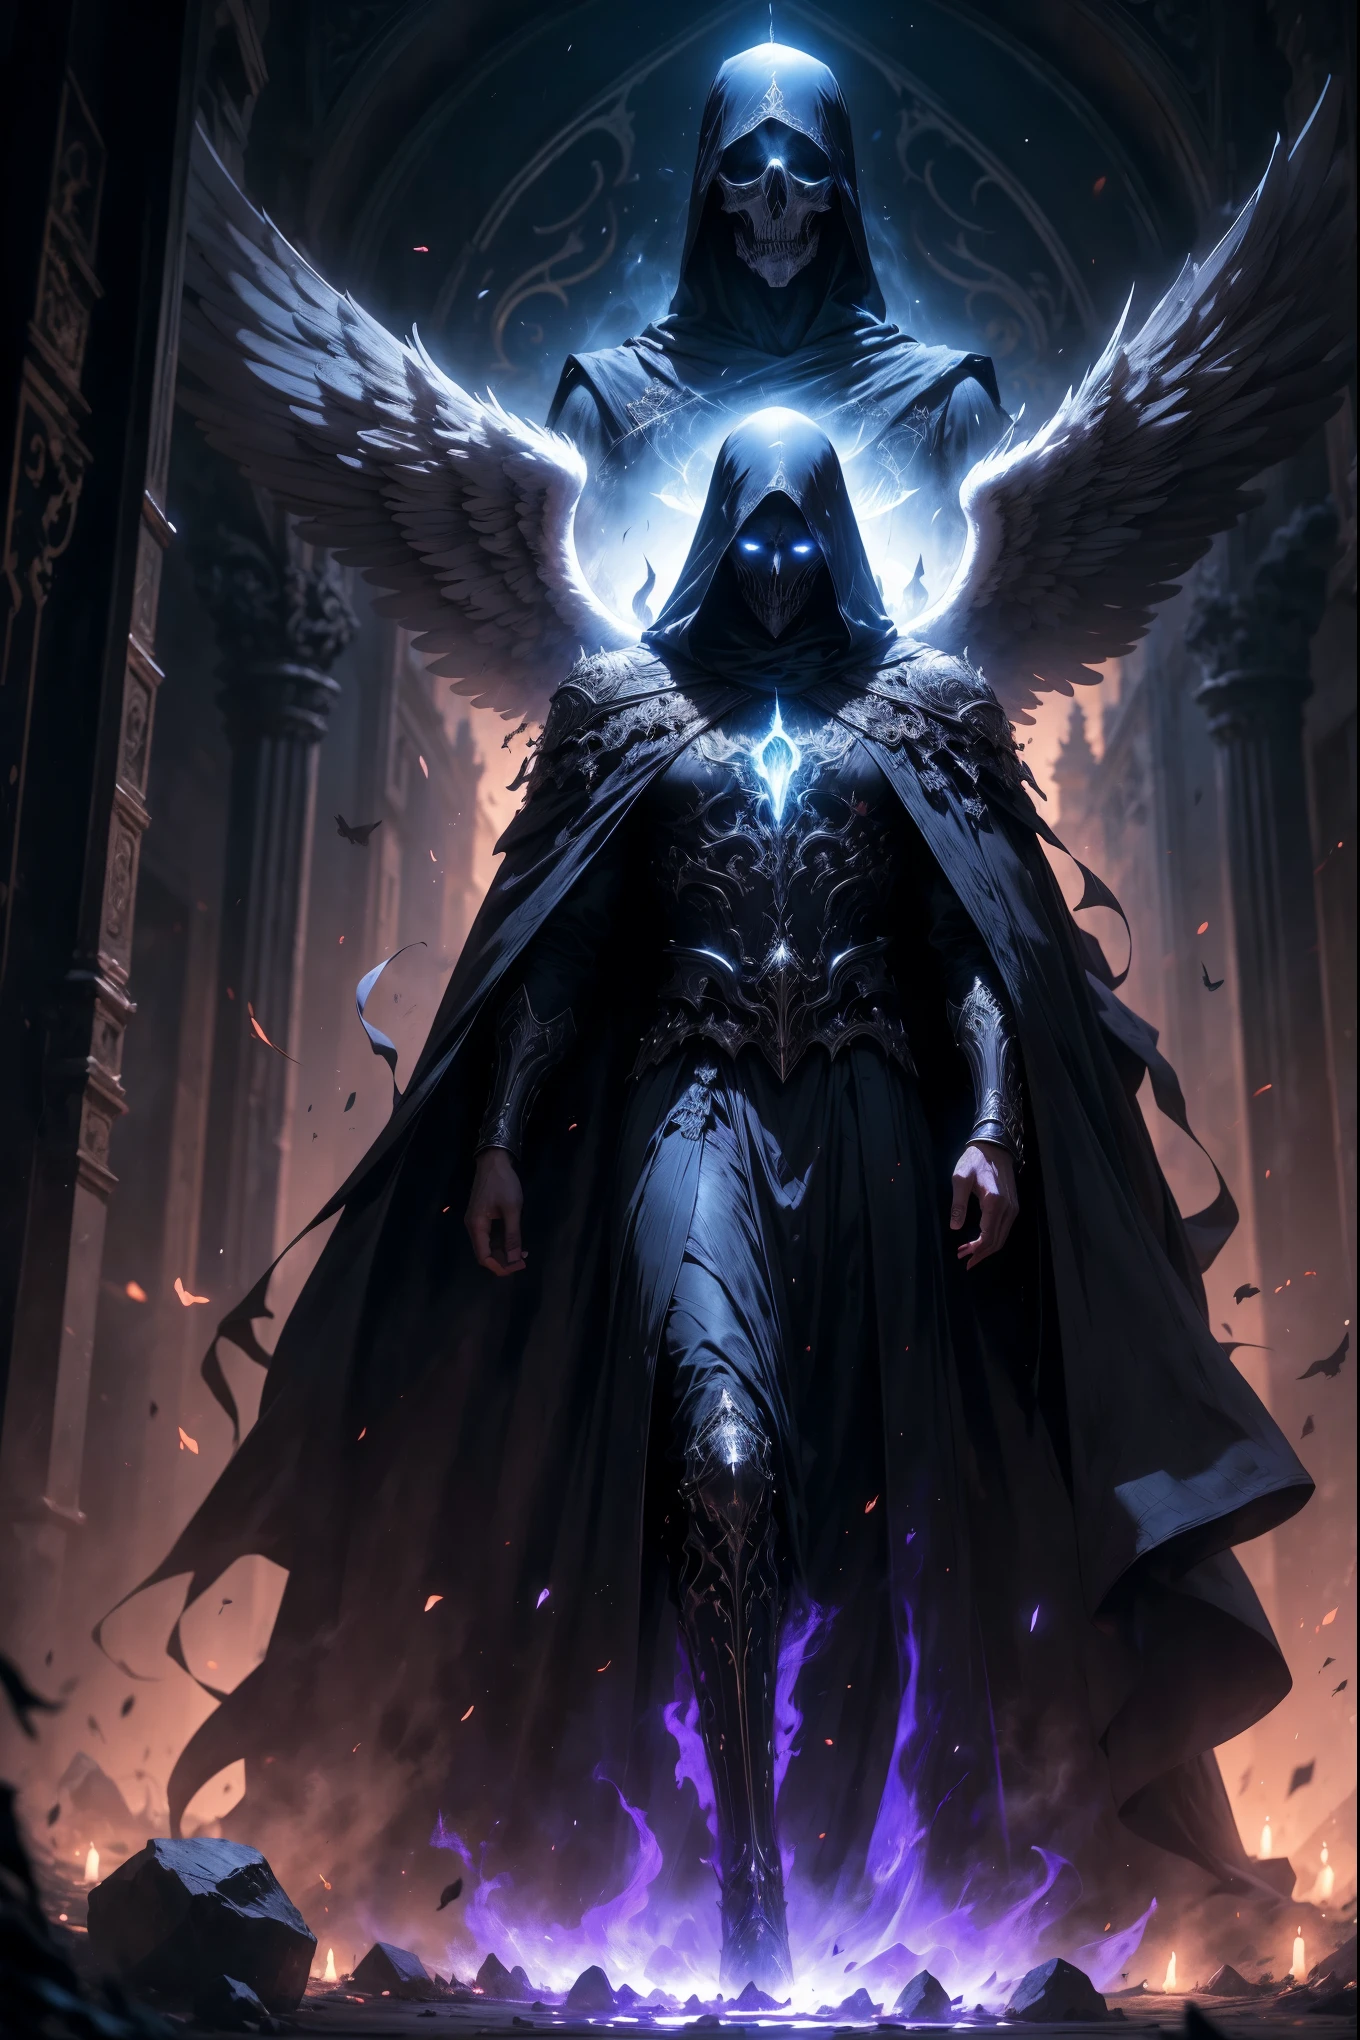 Striking illustration of the Angel of Death., A mysterious and ethereal figure who guards the threshold between life and death.. His presence is enigmatic and powerful...., con alas inmensas que se extienden hacia el horizonte y una mirada penetrante que transmite serenidad y temor. He uses cool tones and deep shadows to emphasize his ethereal nature and his connection to the realm of death......(dark lighting), ( ethereal lighting),(Spectral illumination)